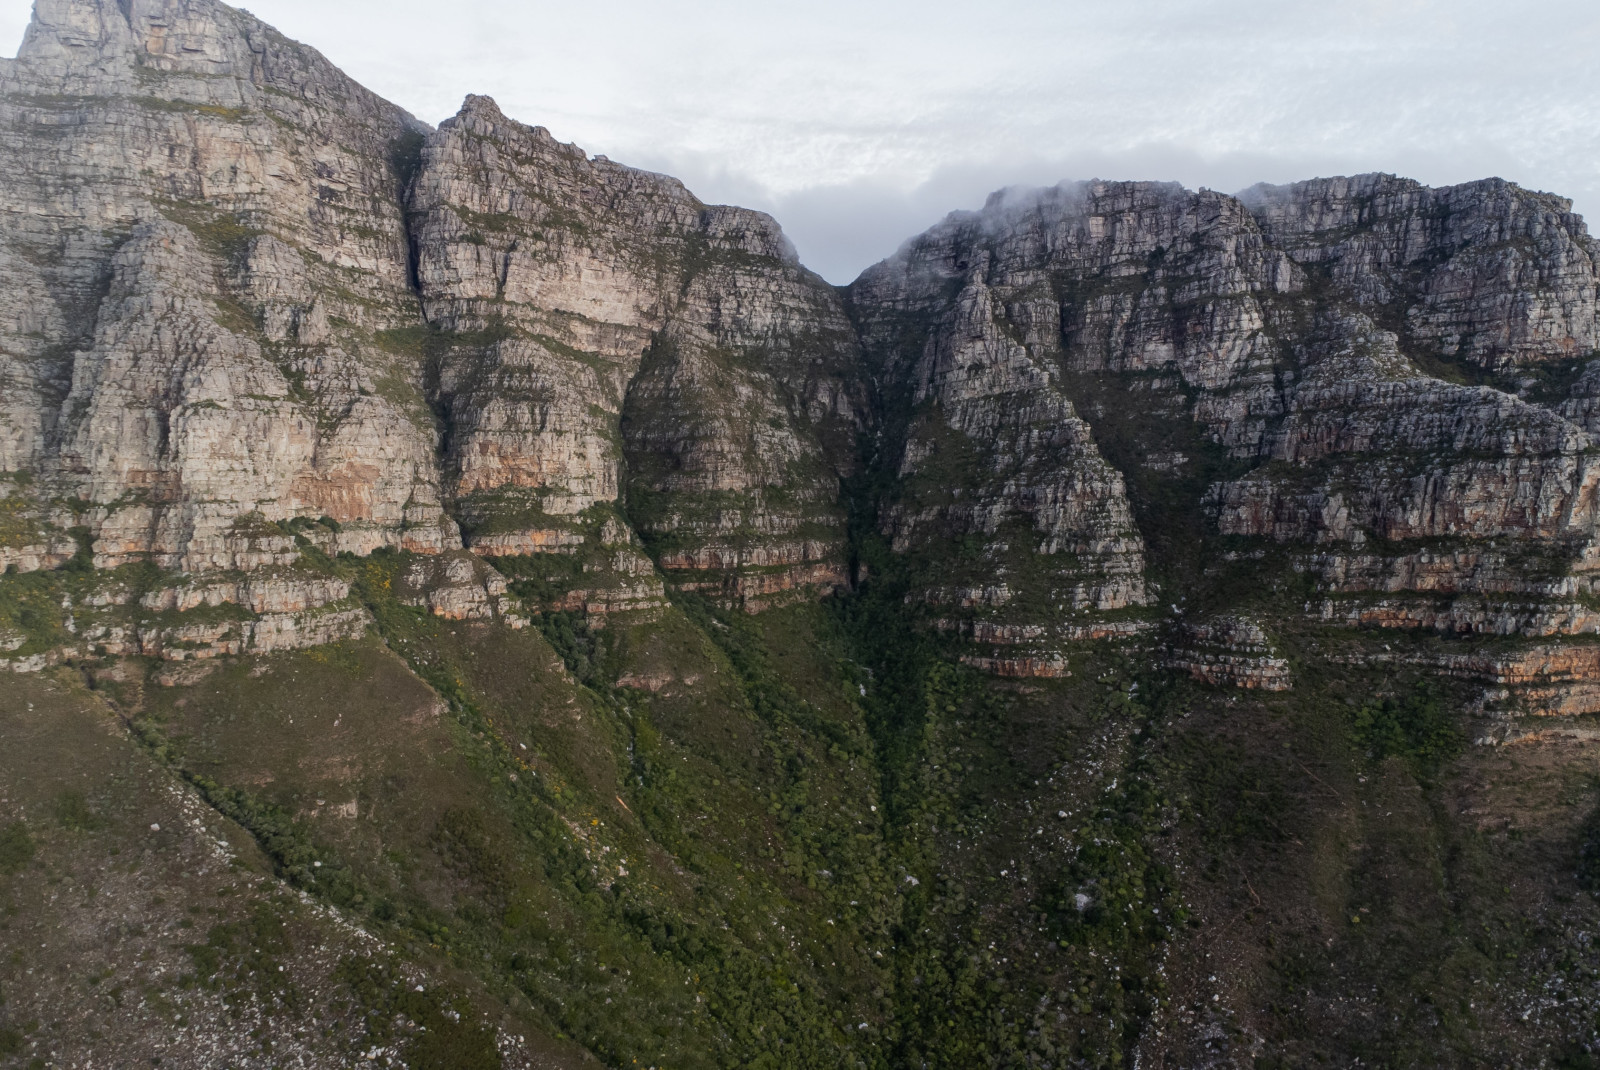 View of Table Mountain in South Africa